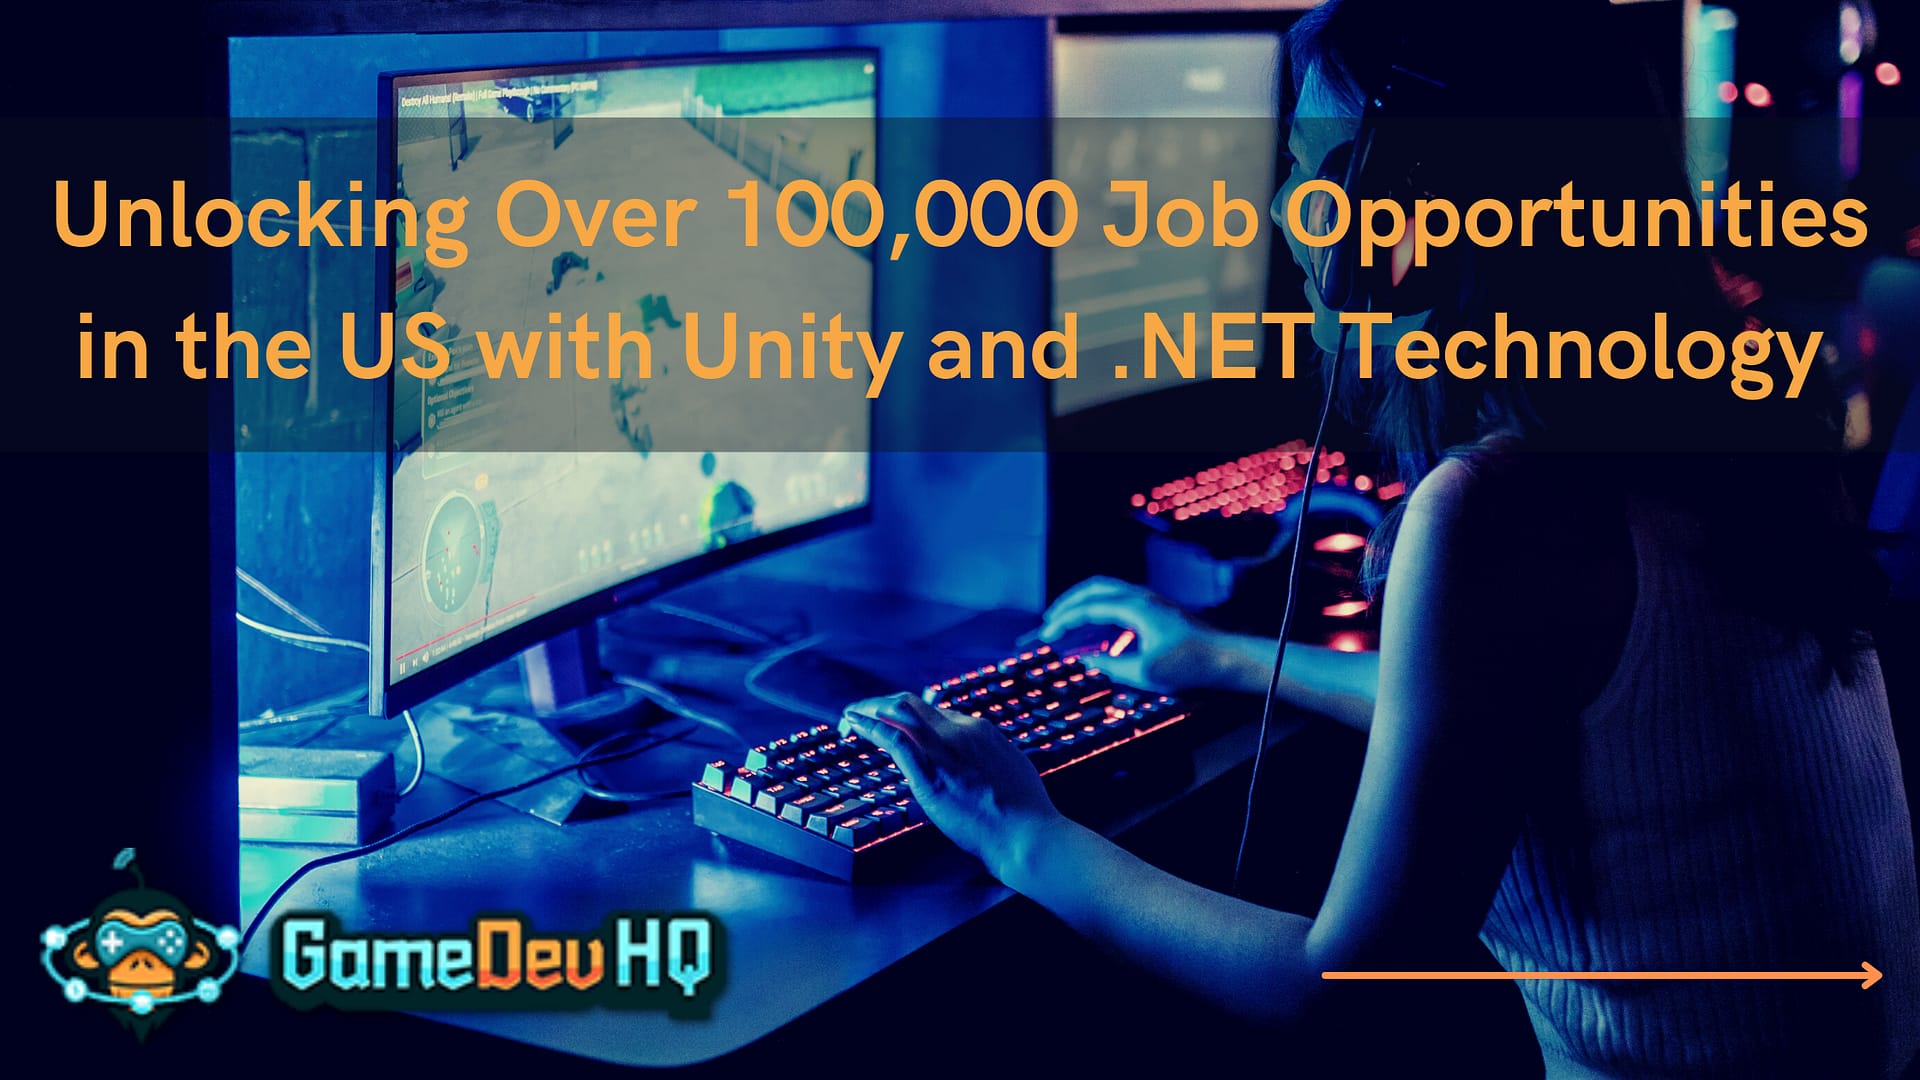 Unlocking Over 100,000 Job Opportunities in the US with Unity and .NET Technology